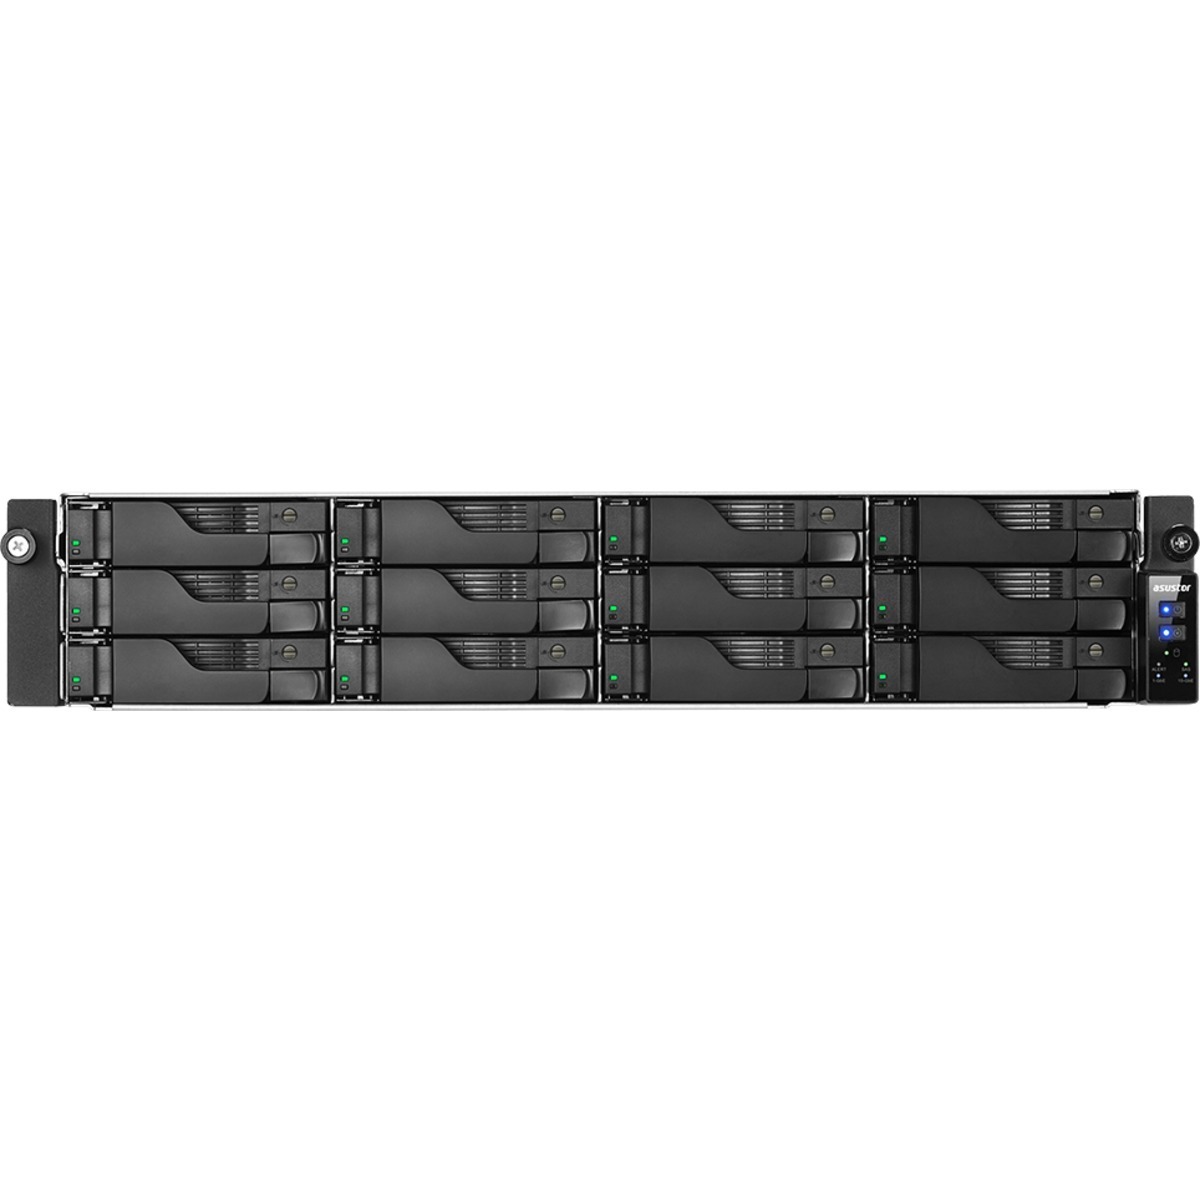 buy $7017 ASUSTOR AS7112RDX Lockerstor 12R Pro 24tb RackMount NAS - Network Attached Storage Device 12x2000gb Western Digital Red SA500 WDS200T1R0A 2.5 SATA 6Gb/s SSD NAS Class Drives Installed - Burn-In Tested - nas headquarters buy network attached storage server device das new raid-5 free shipping usa AS7112RDX Lockerstor 12R Pro